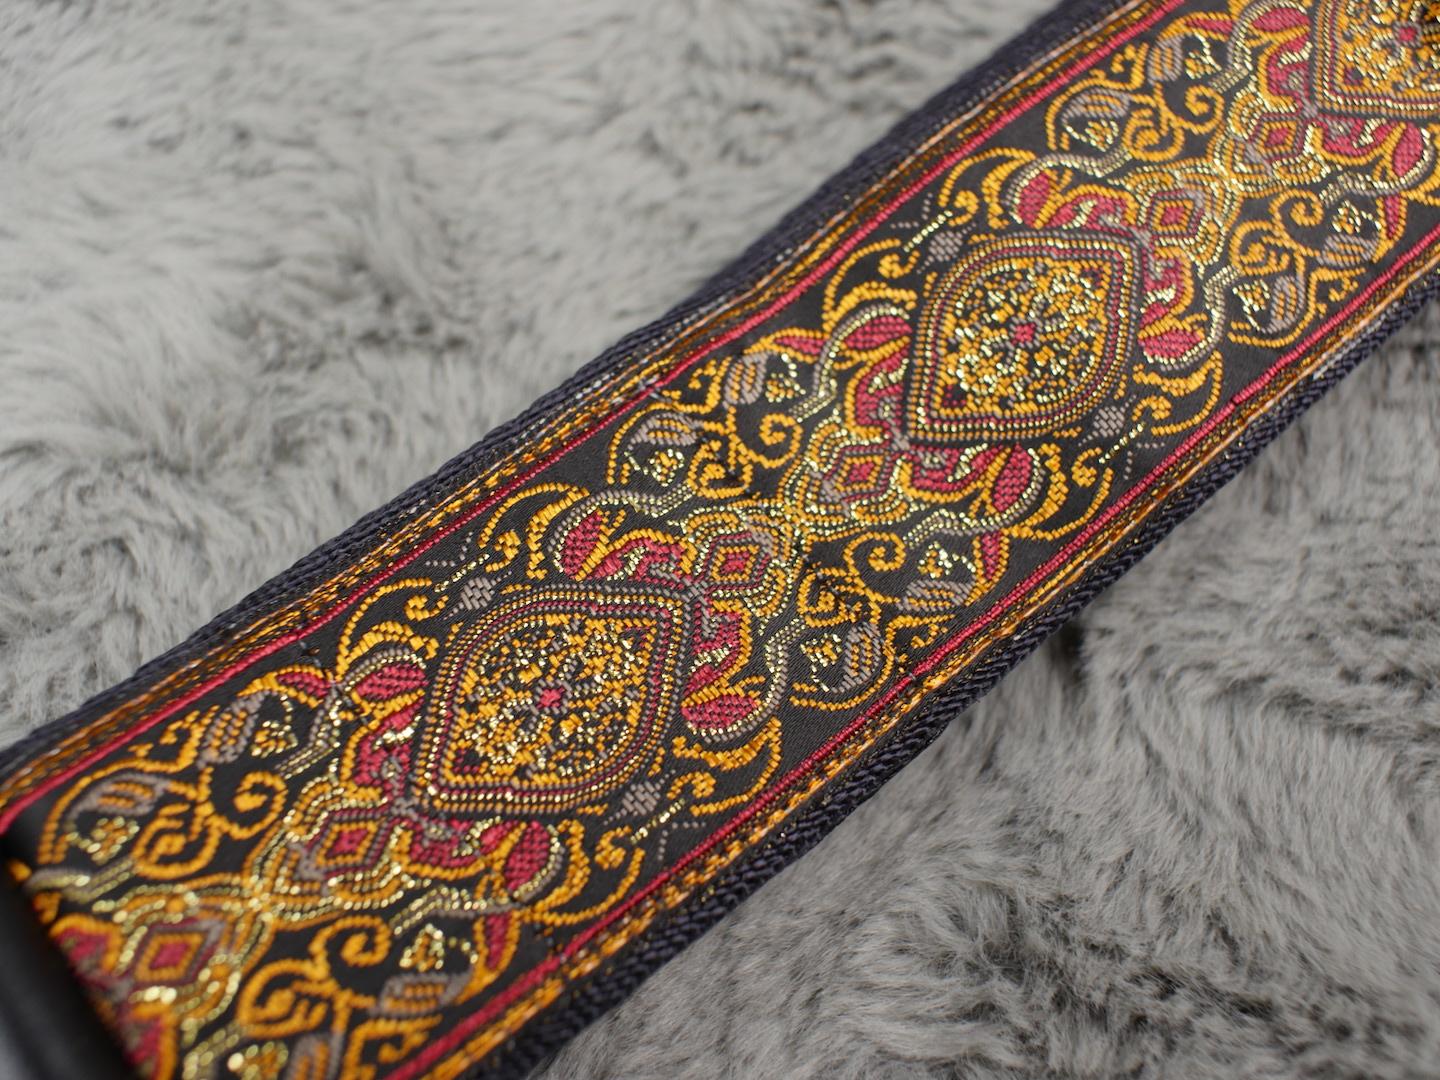 Air Straps Limited Edition 'Indus' Guitar Strap